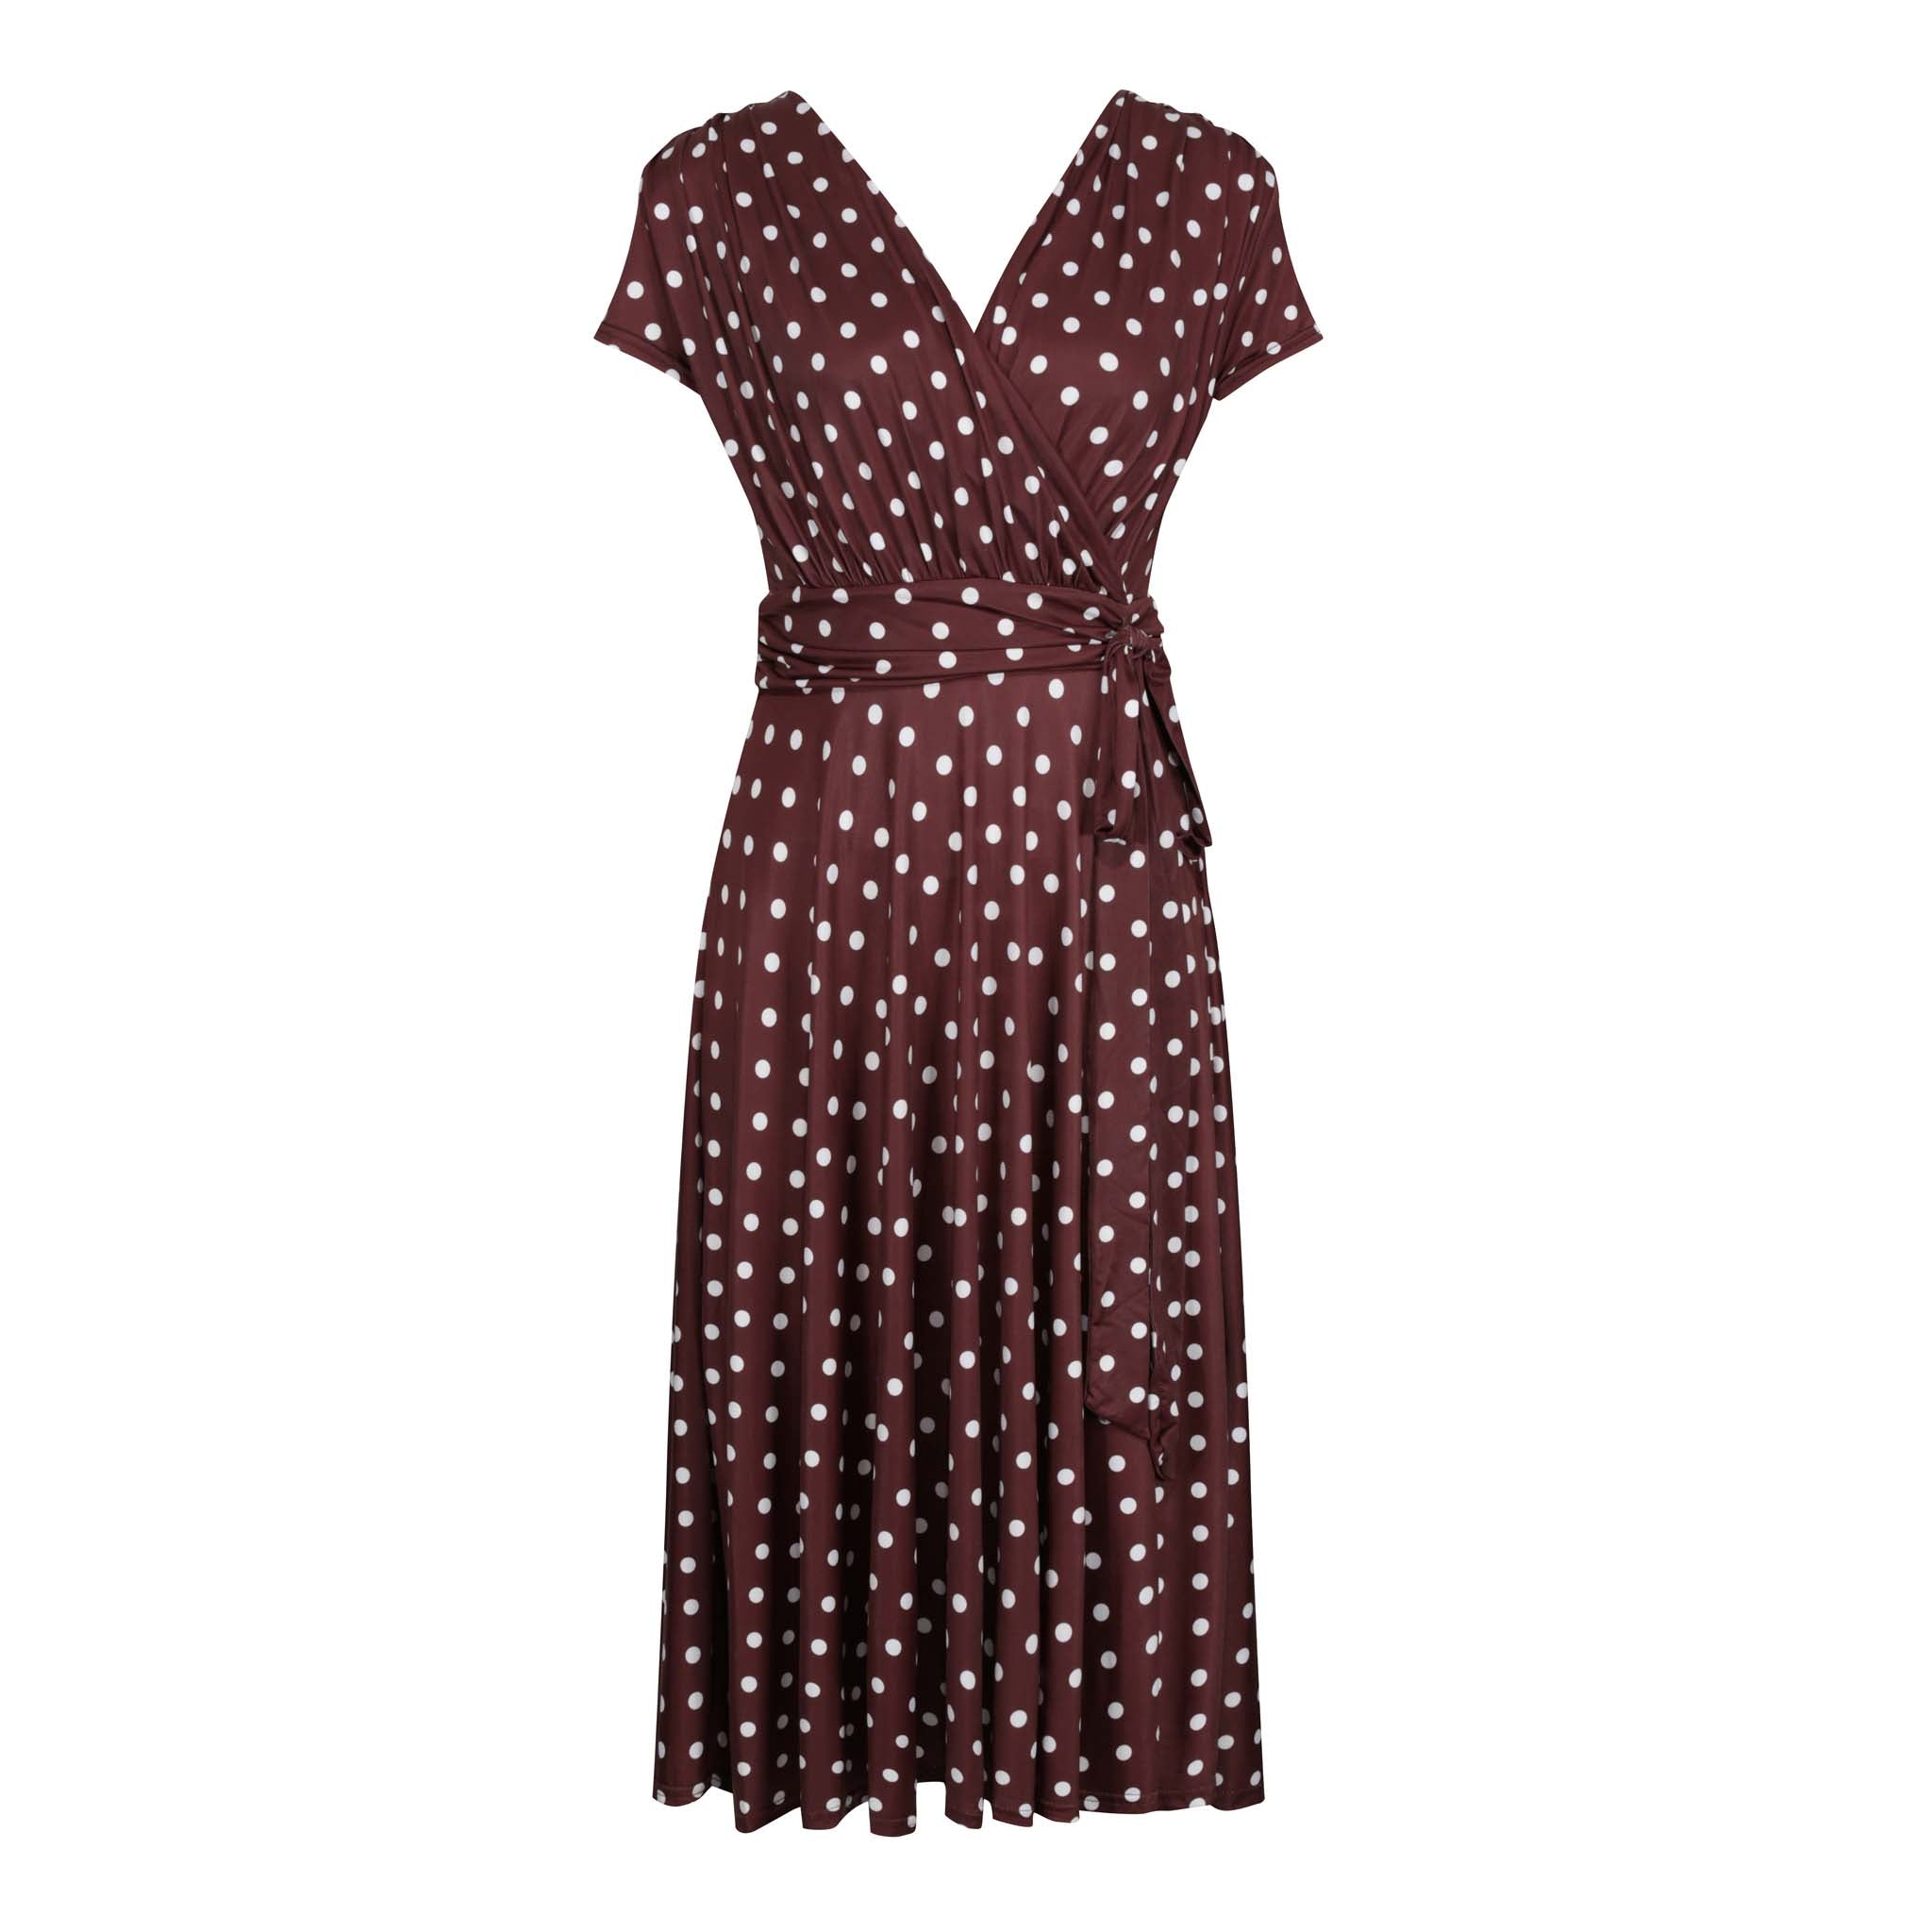 Chocolate Brown And White Polka Dot Cap Sleeve Fit And Flare Midi Dress